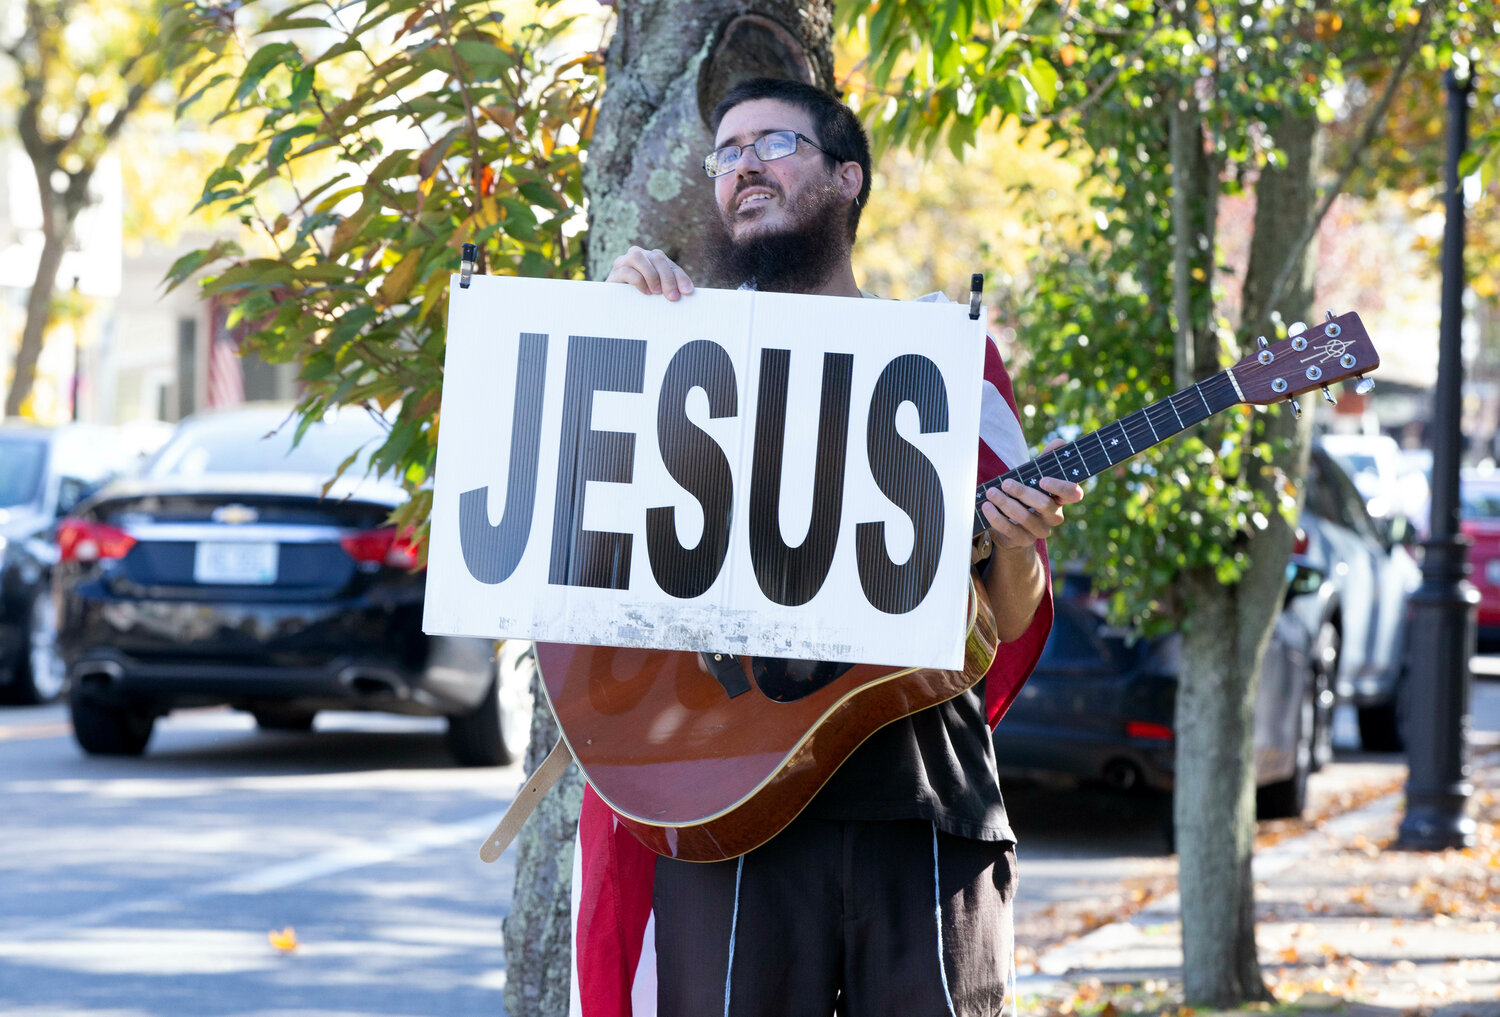 Nathaniel Dempsey, 41, of Warren, plays guitar and totes his Jesus sign on Main Street in Warren.